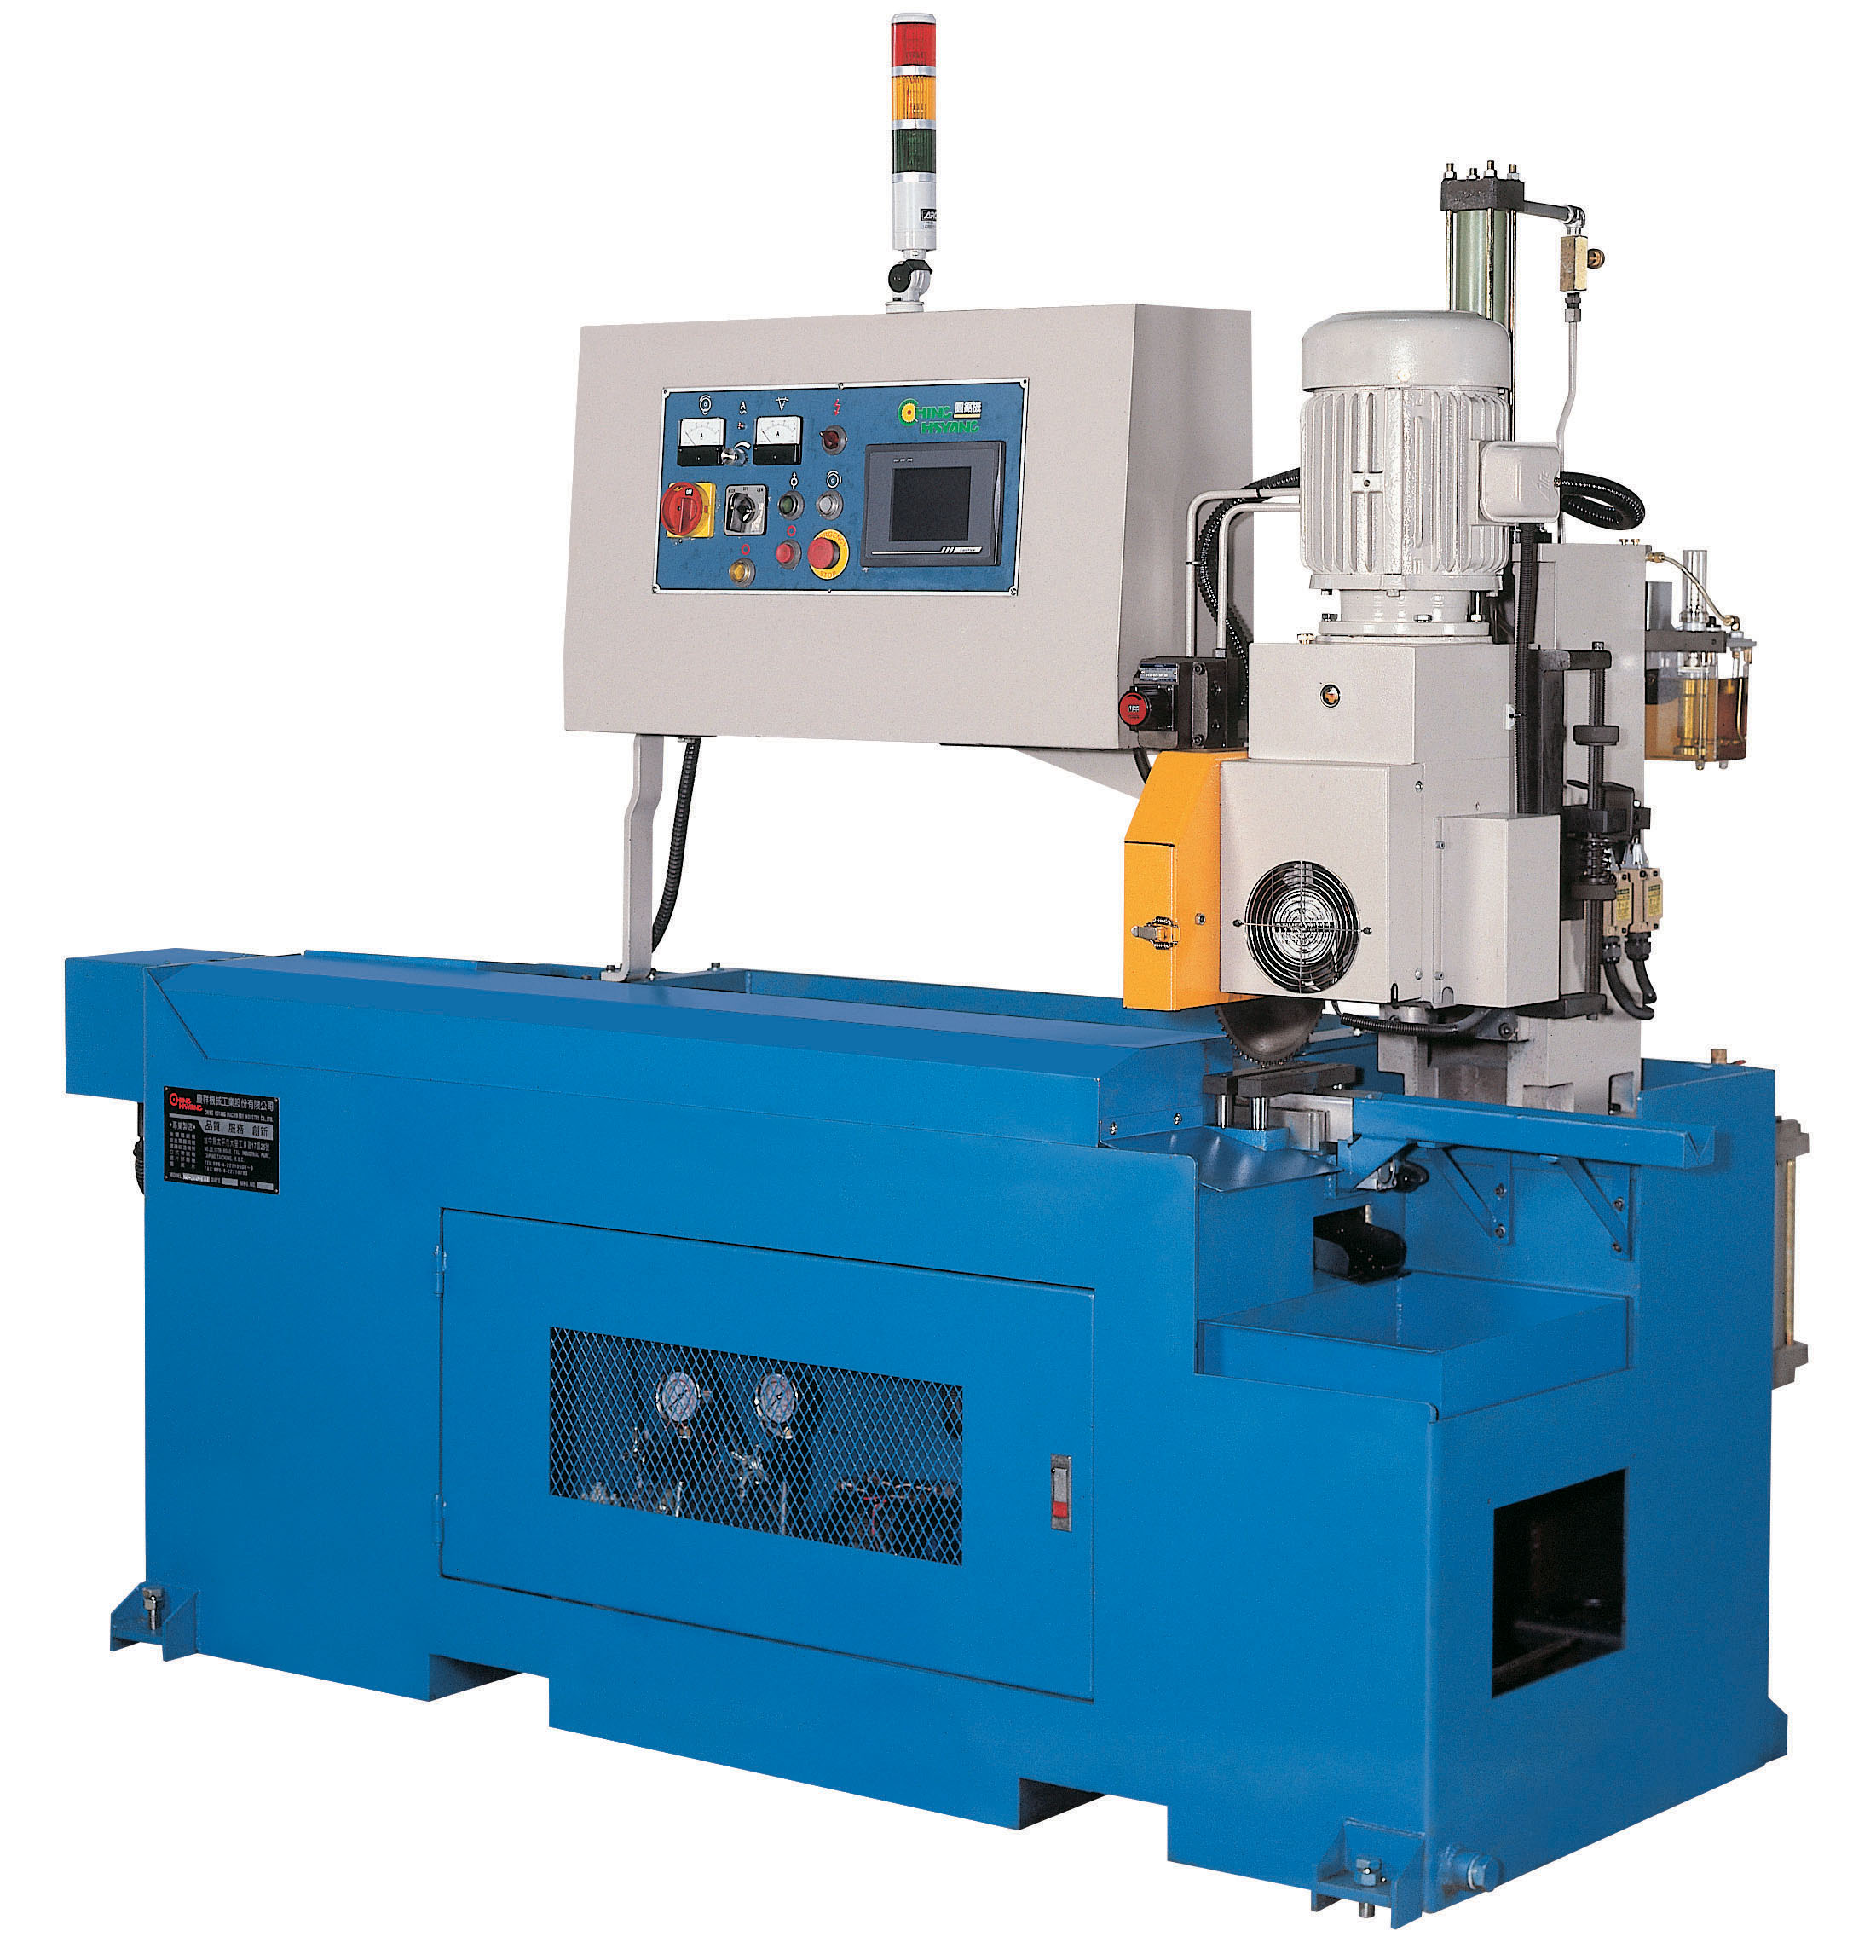 Fully Automatic Type Rest Material Retrieve Machine-NC-400-5AIK